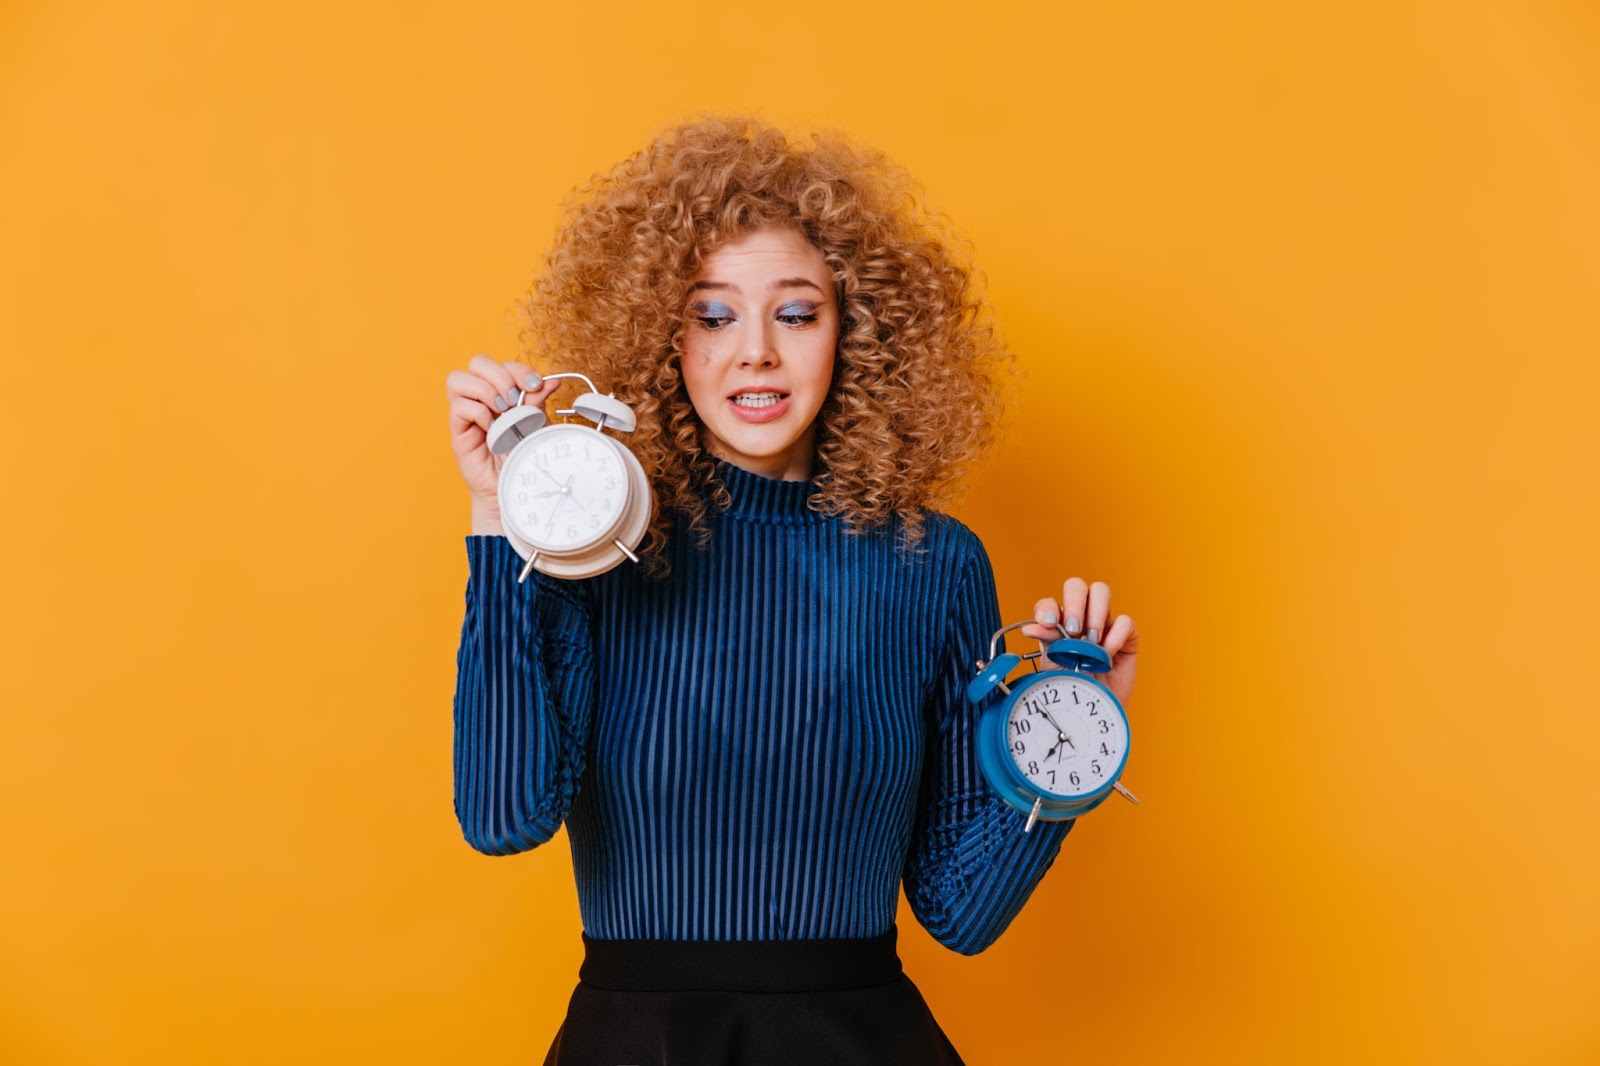 <p>Time management can be a lifesaver. Here are a few tactics:</p> <ul>   <li>Prioritize wisely: Always tackle tasks that must get done today and push less critical things to a later date.</li>   <li>Batch similar tasks: Do all your errands at once or schedule all meetings for the same day to free up other days for deep focus work or family time.</li>   <li>Block your time: Plan your days in chunks; one for work tasks, another for family activities, and even some downtime for yourself.</li>  </ul>